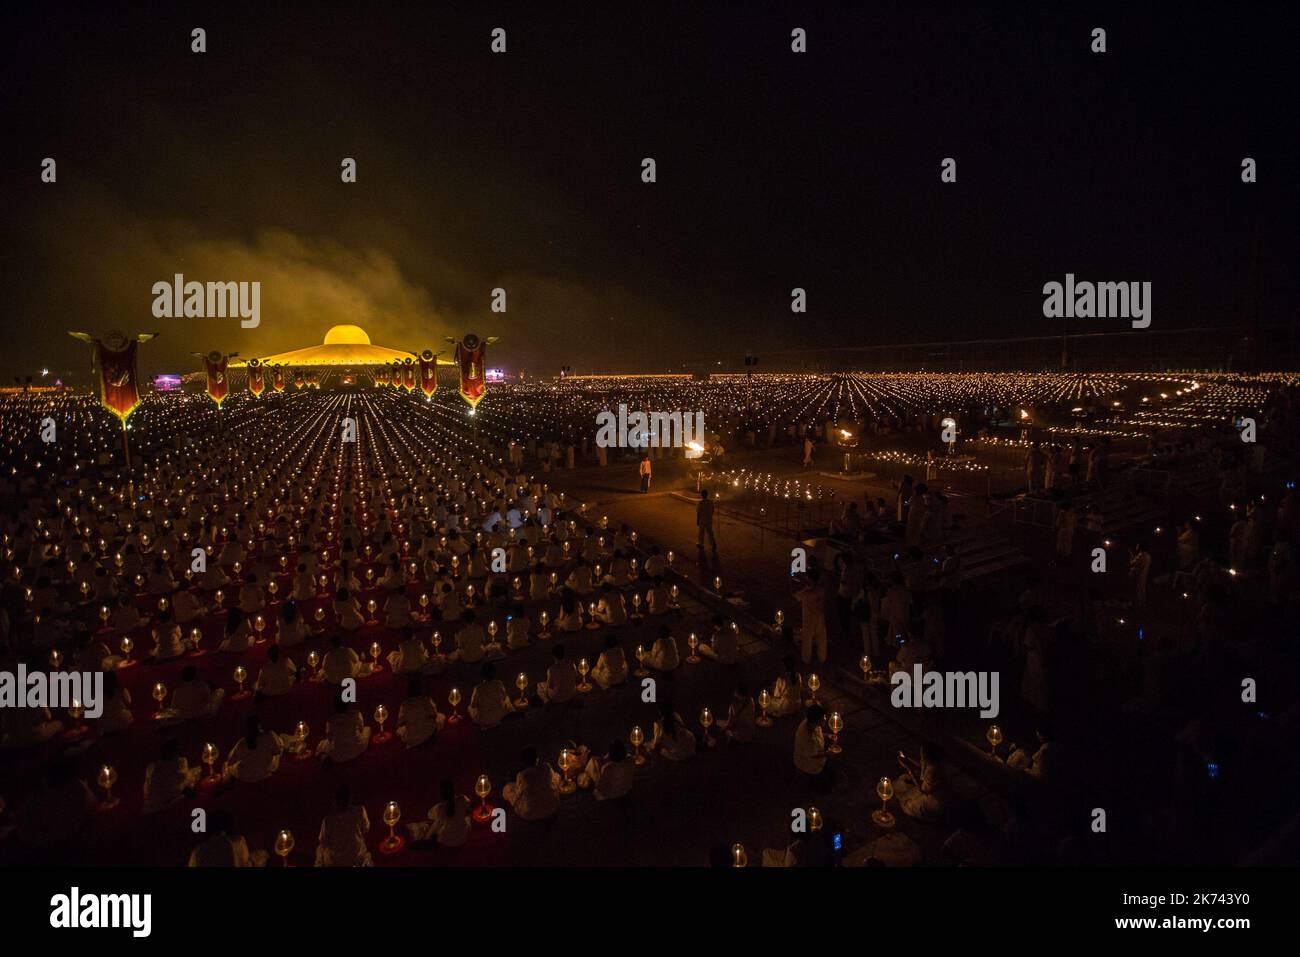 A general view of the Wat Phra Dhammakaya Temple during the yearly ceremony at in the north of Bangkok, Thailand on February 11, 2016. Thai people celebrate the buddhist festival of clockwise circumambulation and Makha pratipa lantern lighting ceremony at Dhammakaya Temple on 'Makha Bucha Day' during the third lunar moon, where around 1250 monks gathered to be ordained by the Buddha. Stock Photo